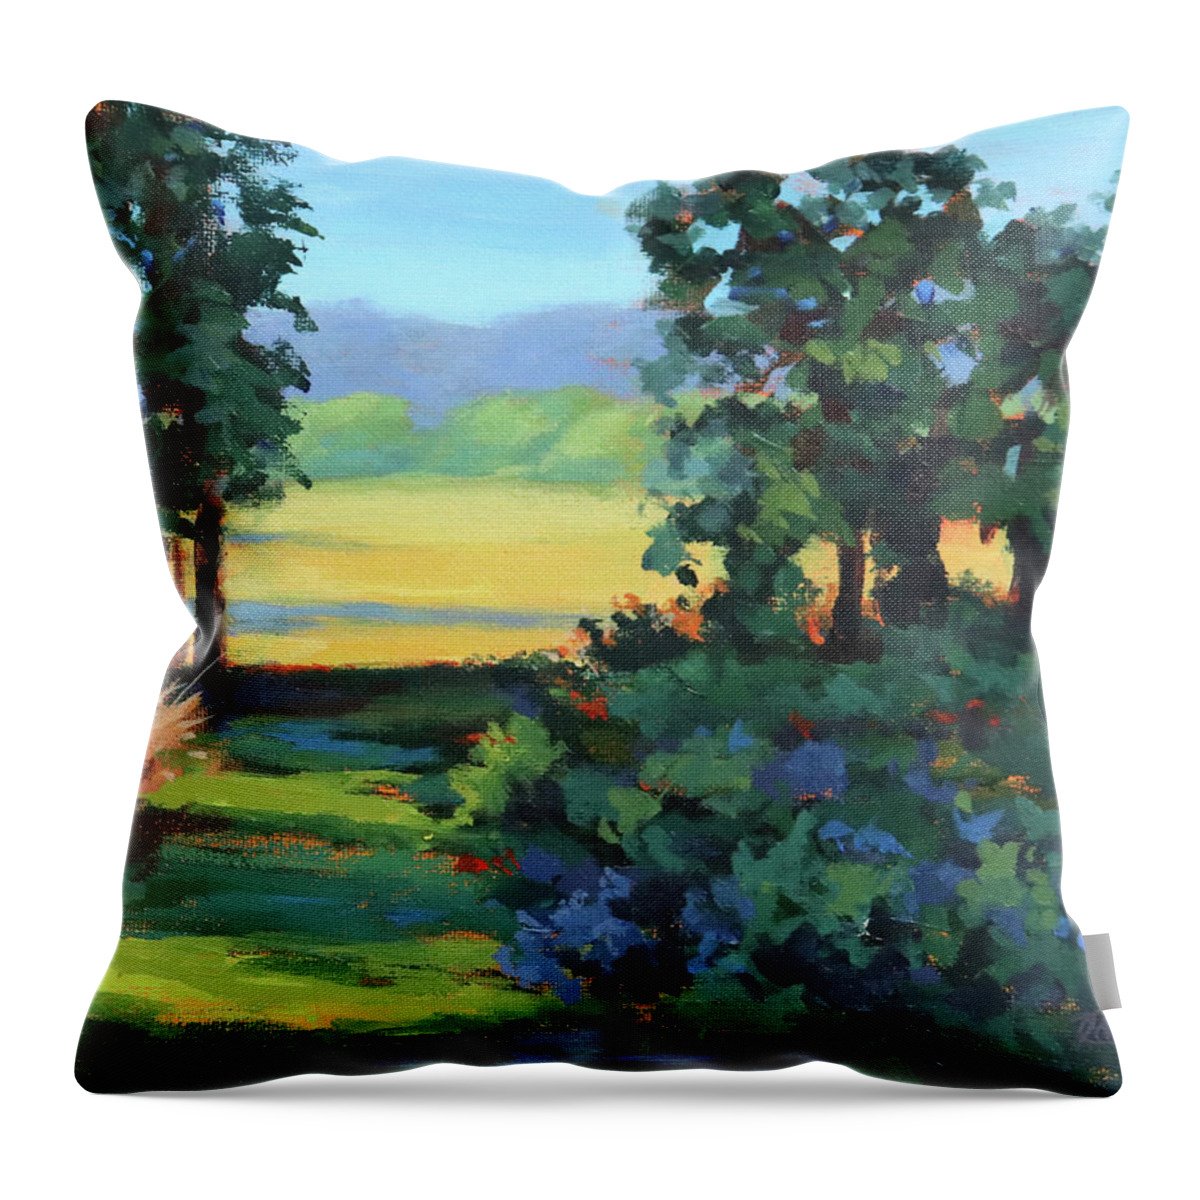 Landscape Throw Pillow featuring the painting Blueberry Patch by Karen Ilari